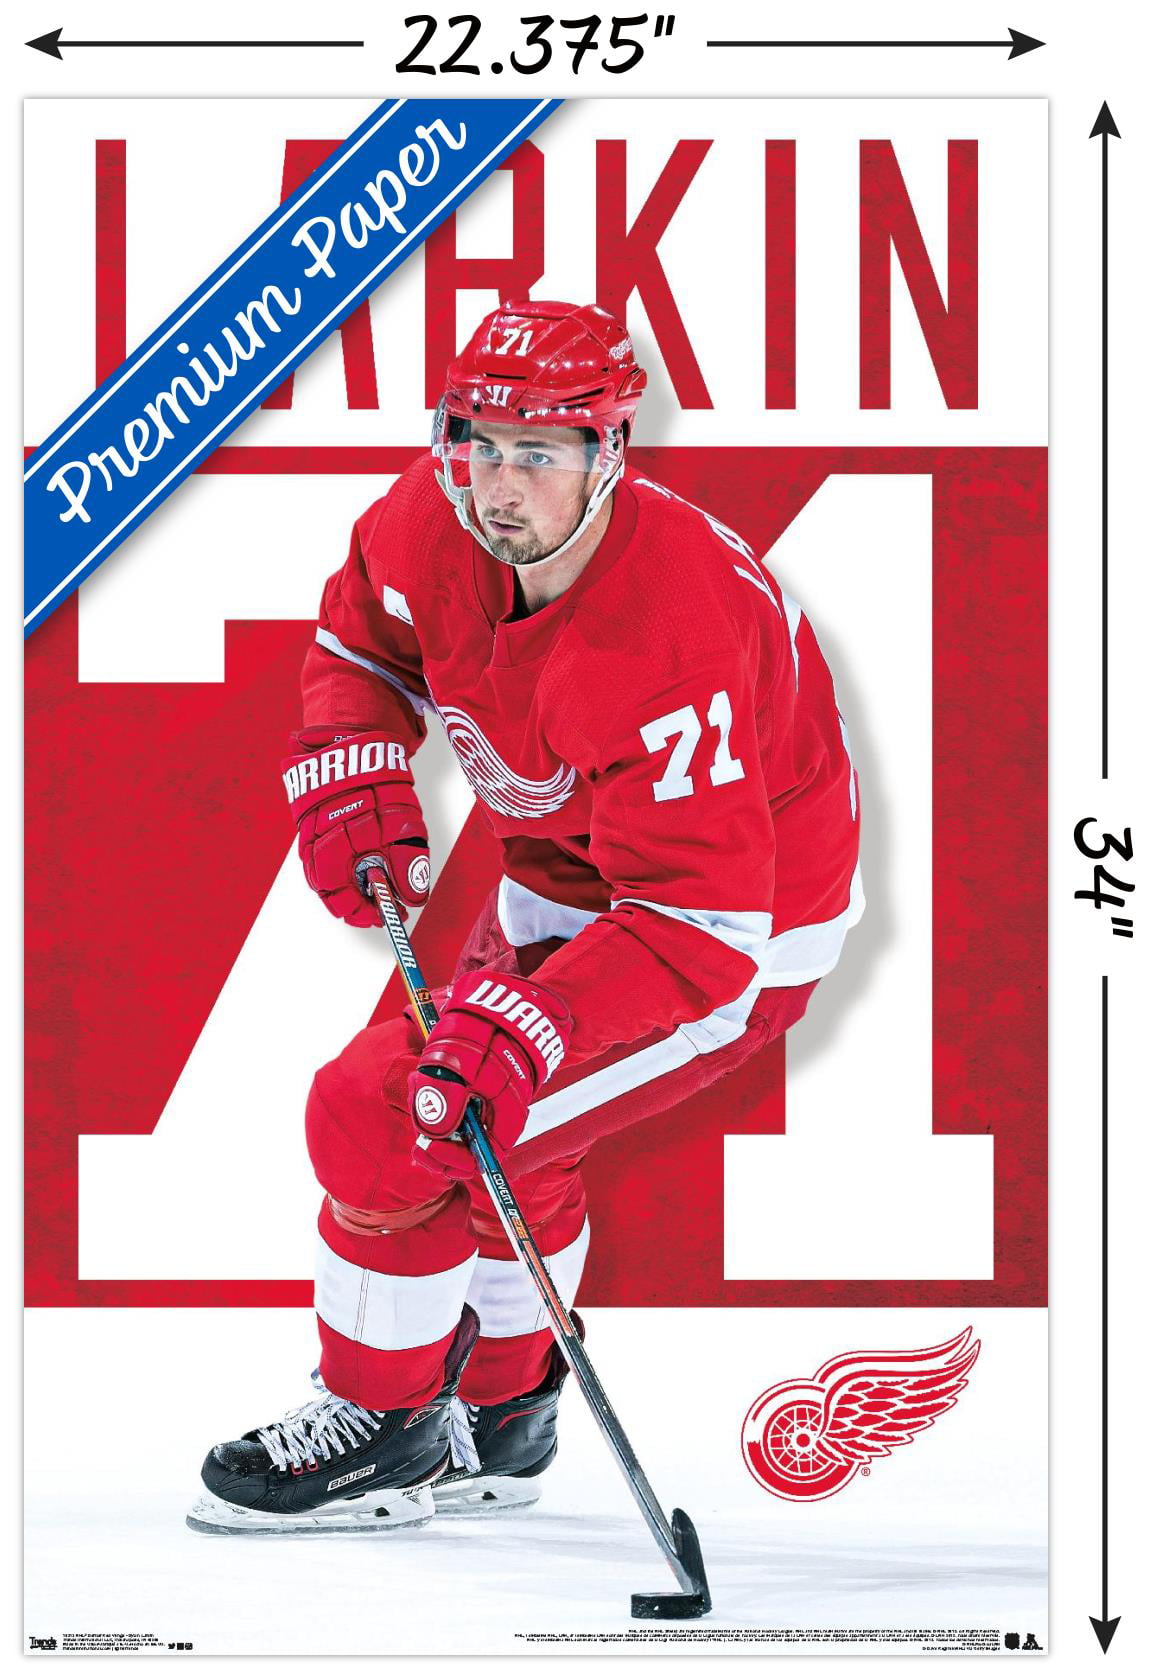 Dylan Larkin Locker Room Nameplate from 2019 Player Media Tour - Detroit  Red Wings - NHL Auctions